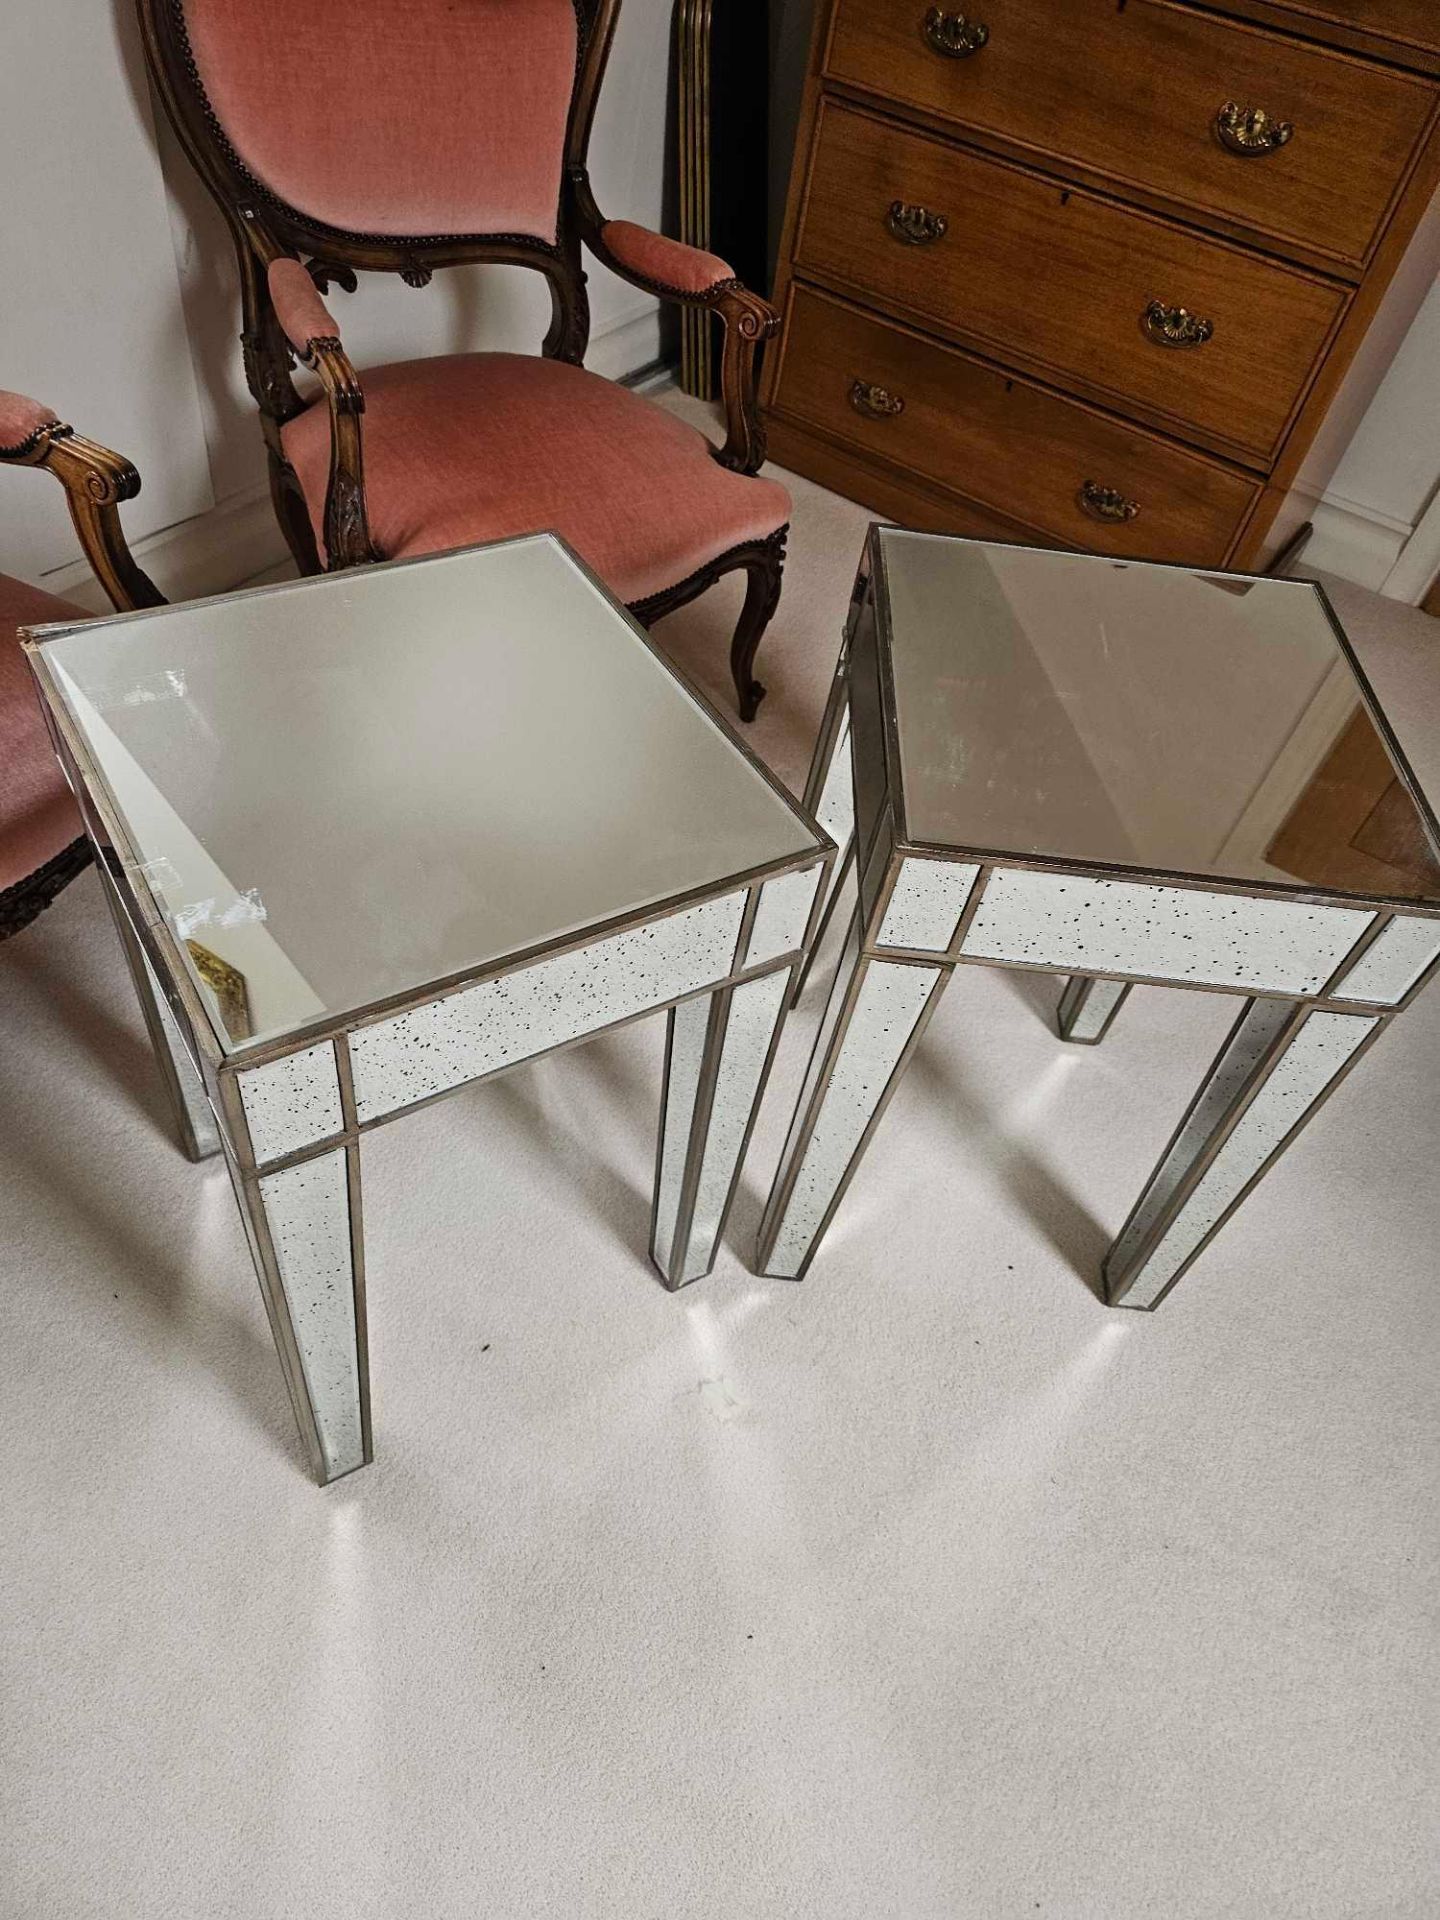 A Pair Of Pattington Mirror Side Tables Contemporary Design With An Antique Finish 43 X 43 X 65cm ( - Image 4 of 4